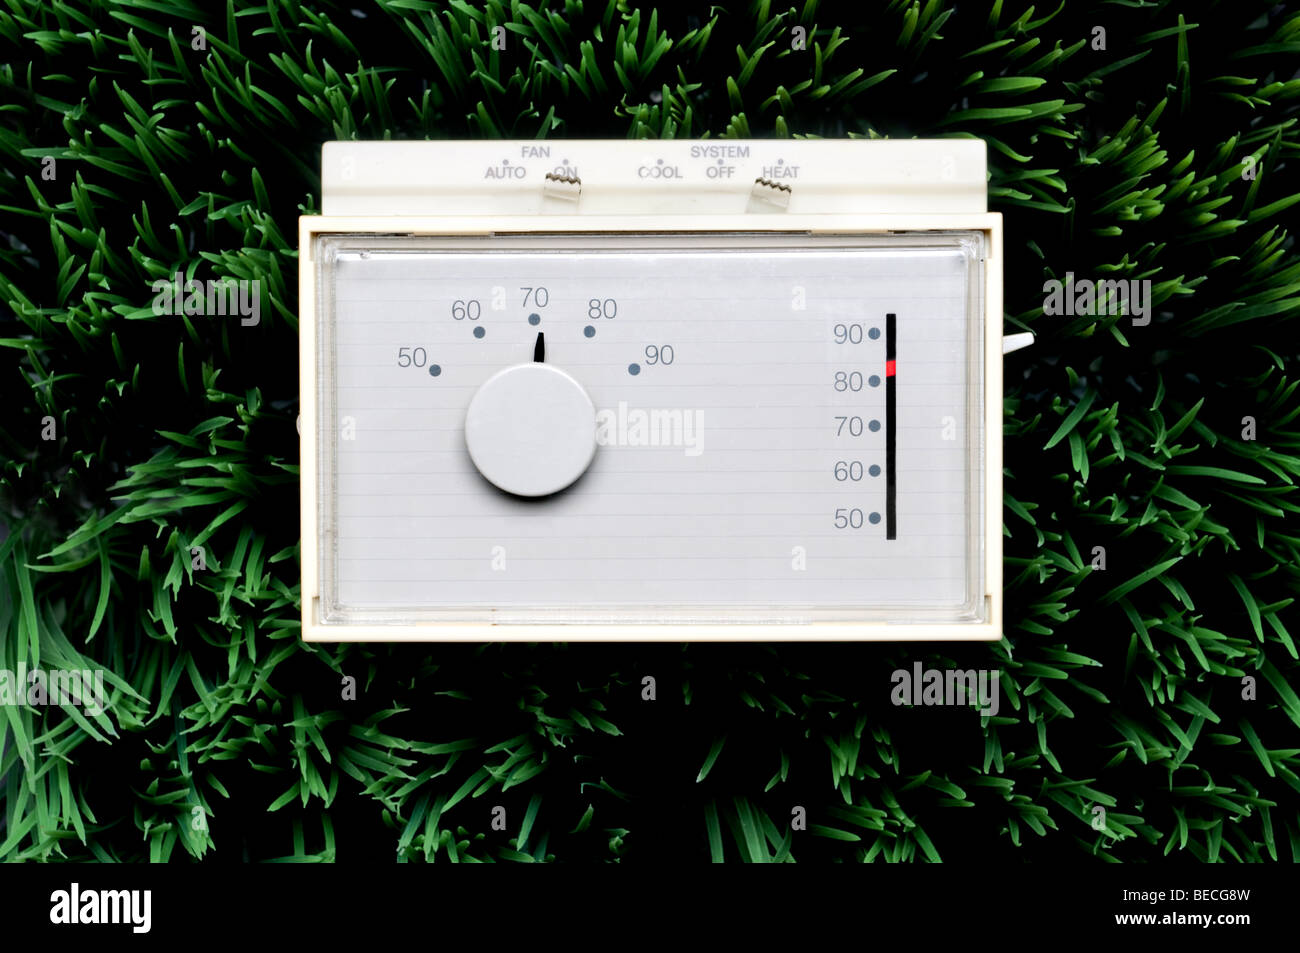 an old inefficient thermostat on grass Stock Photo